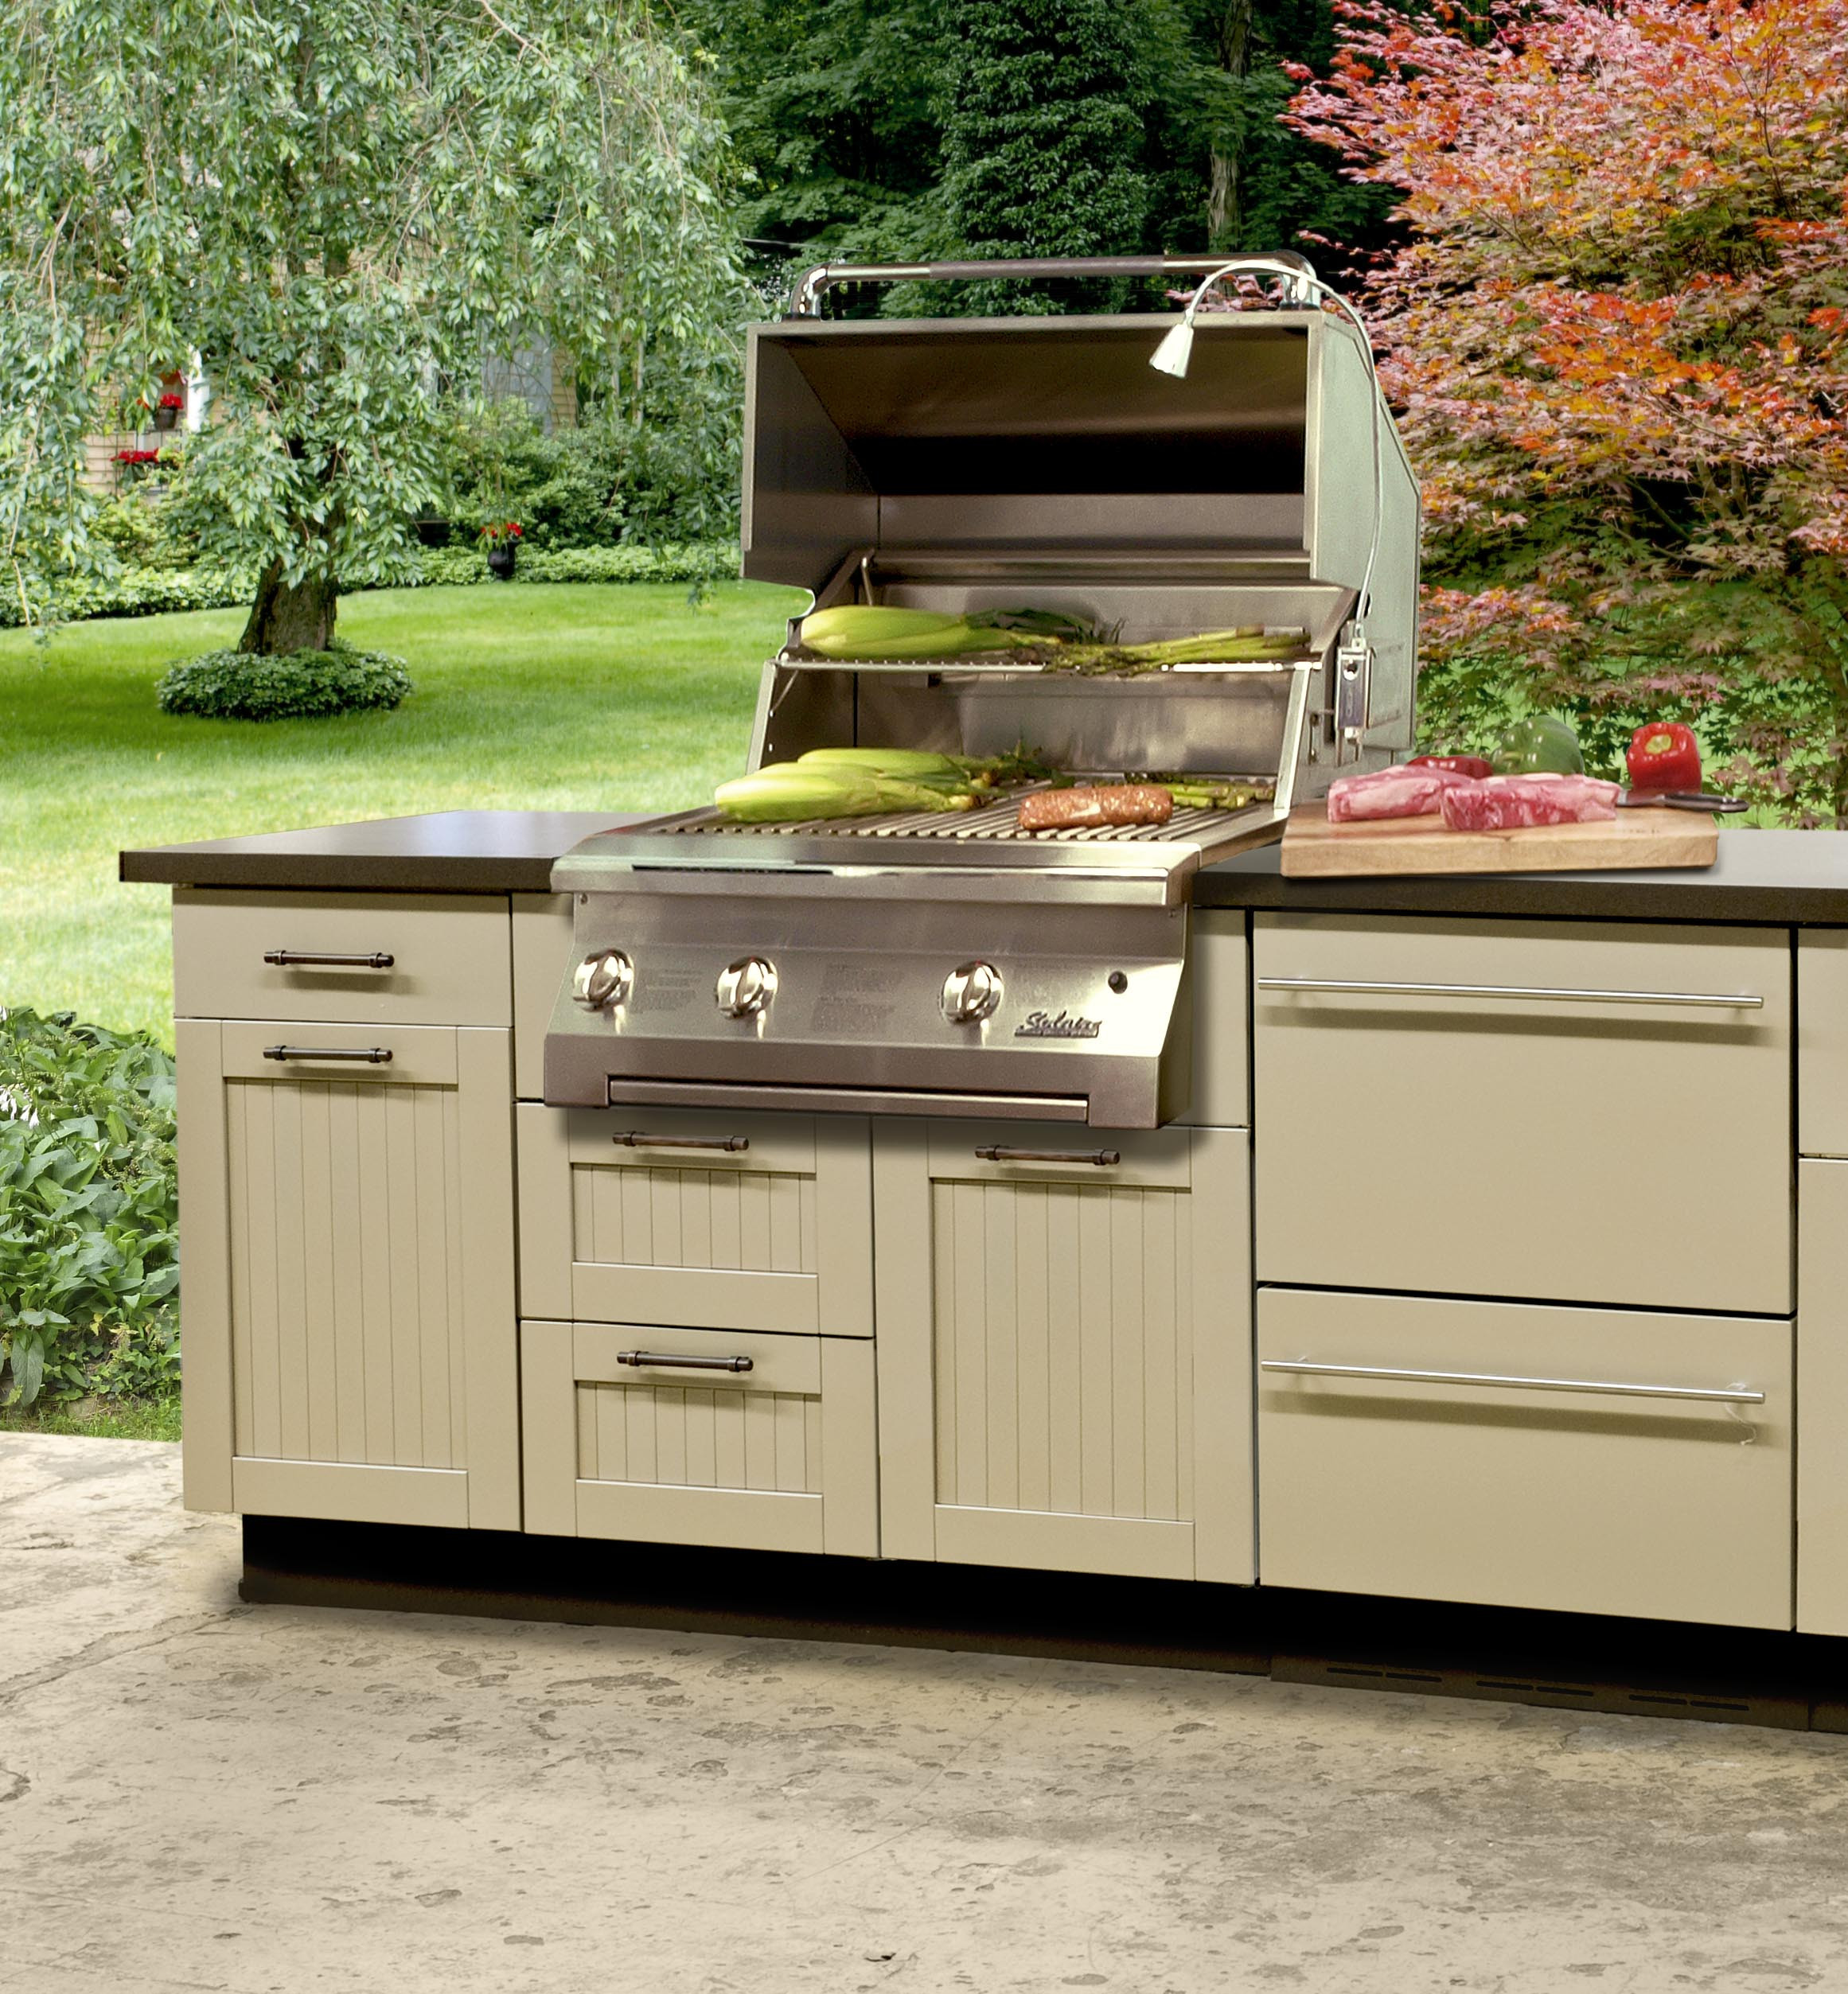 Outdoor Kitchen Units
 Danver Stainless Steel Cabinetry